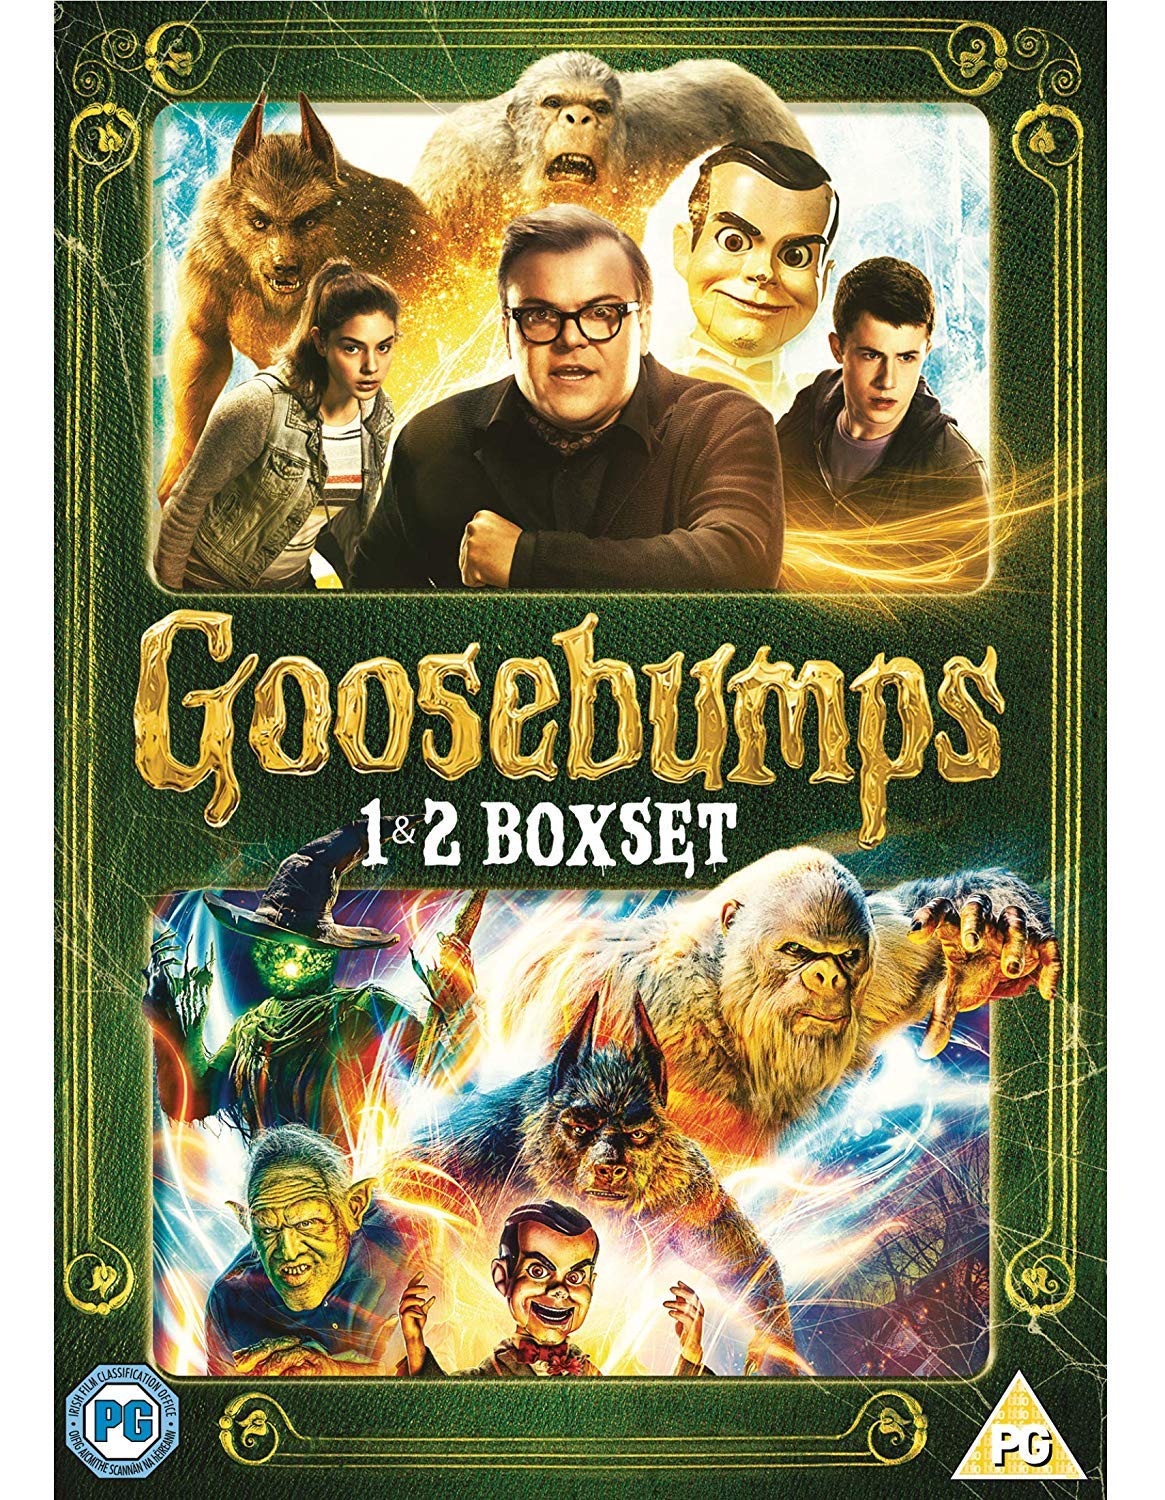 The Goosebumps movies are for any fan kid or adult alike